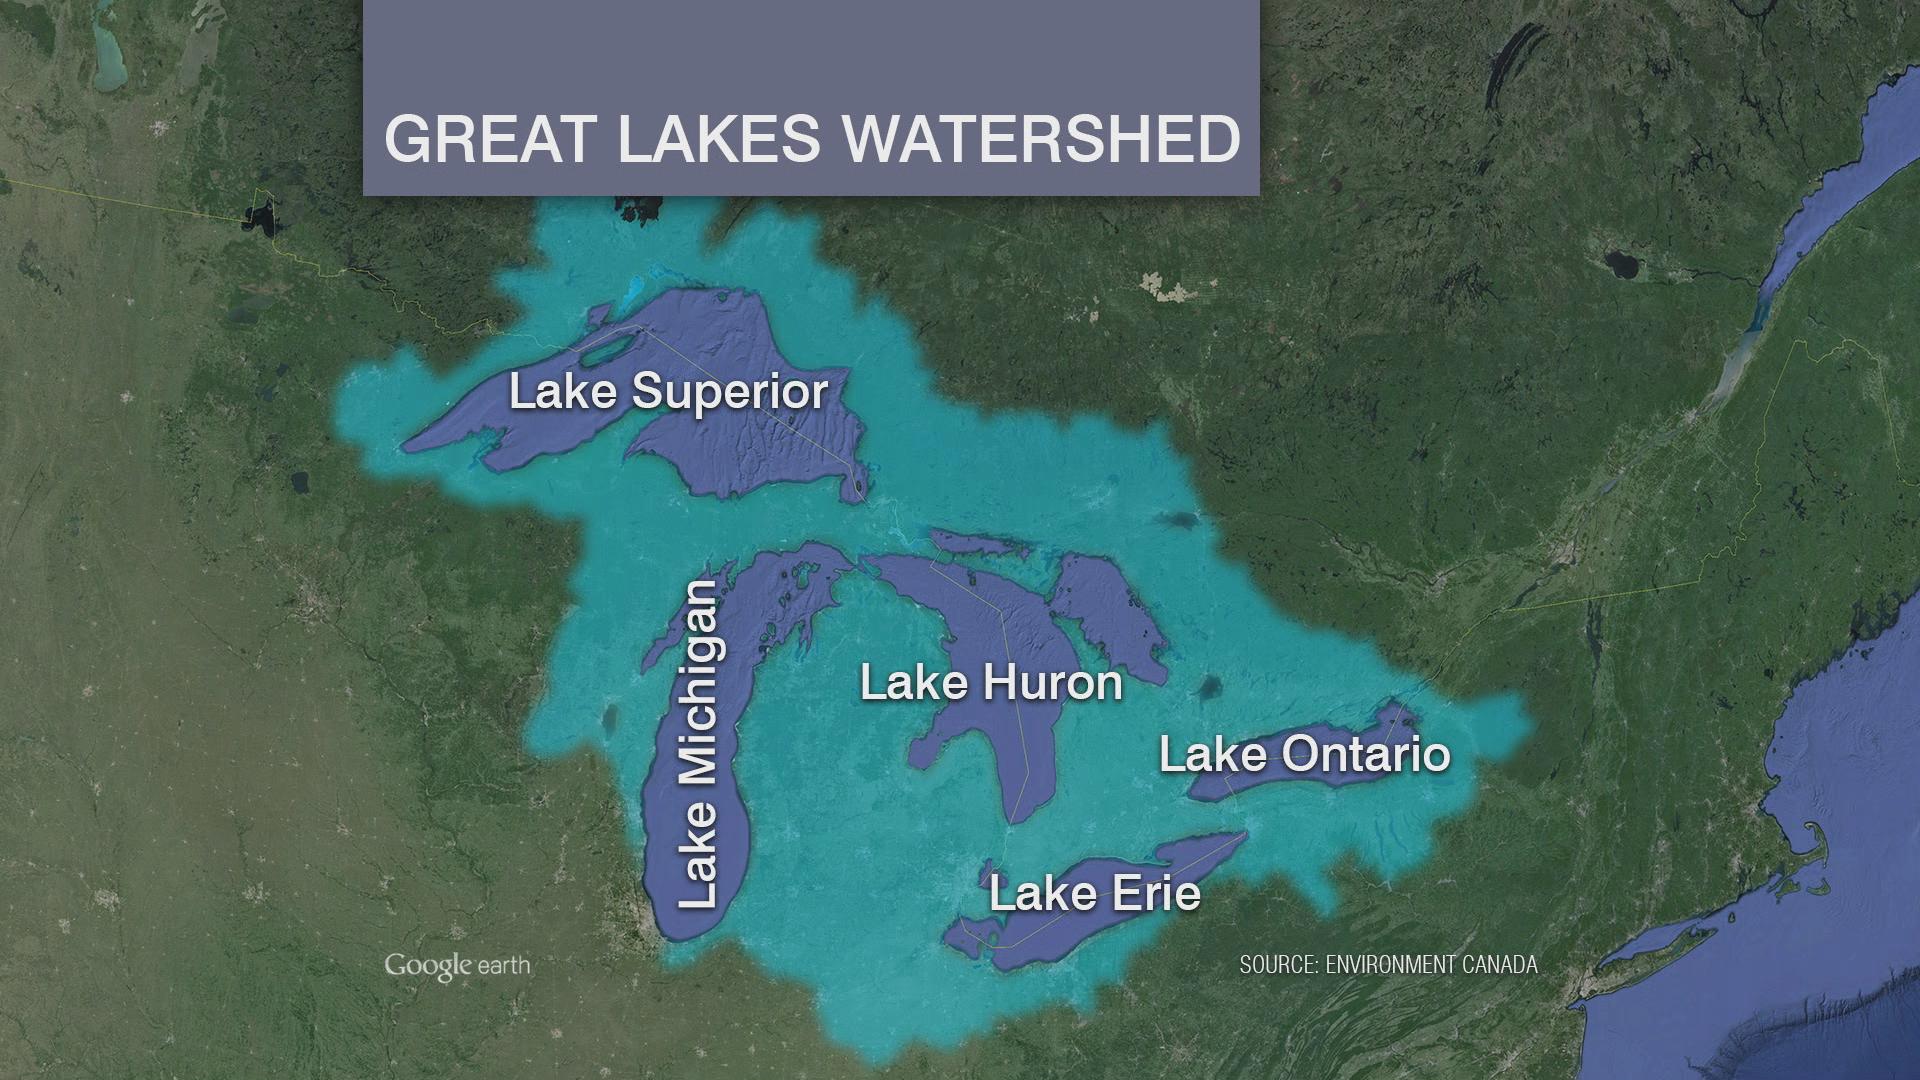 The Great Lakes Watershed